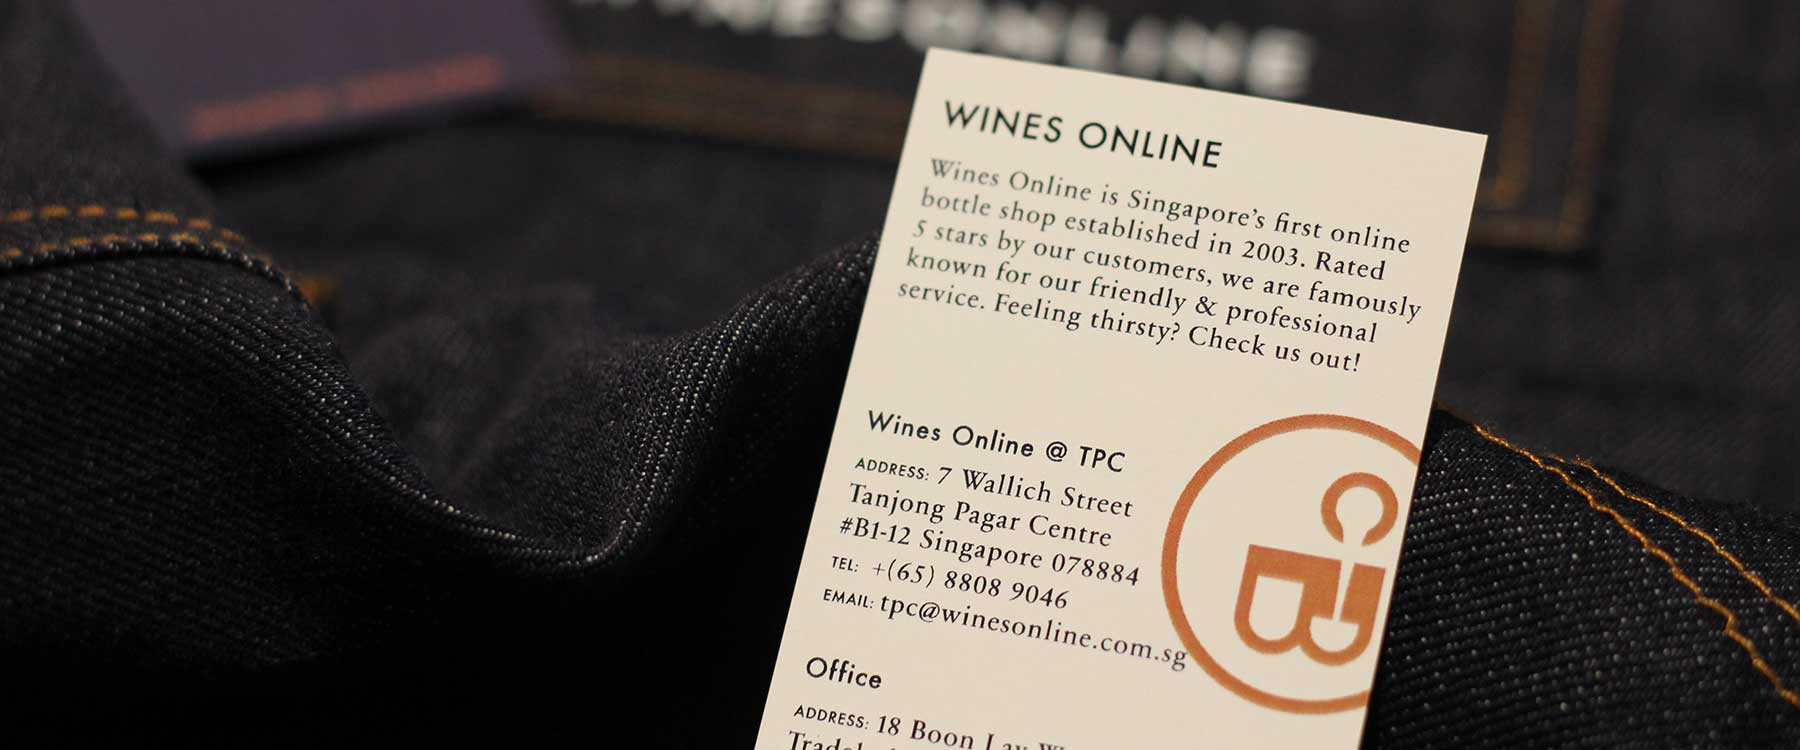 Wines Online Bottle Shop@TPC location and opening hours